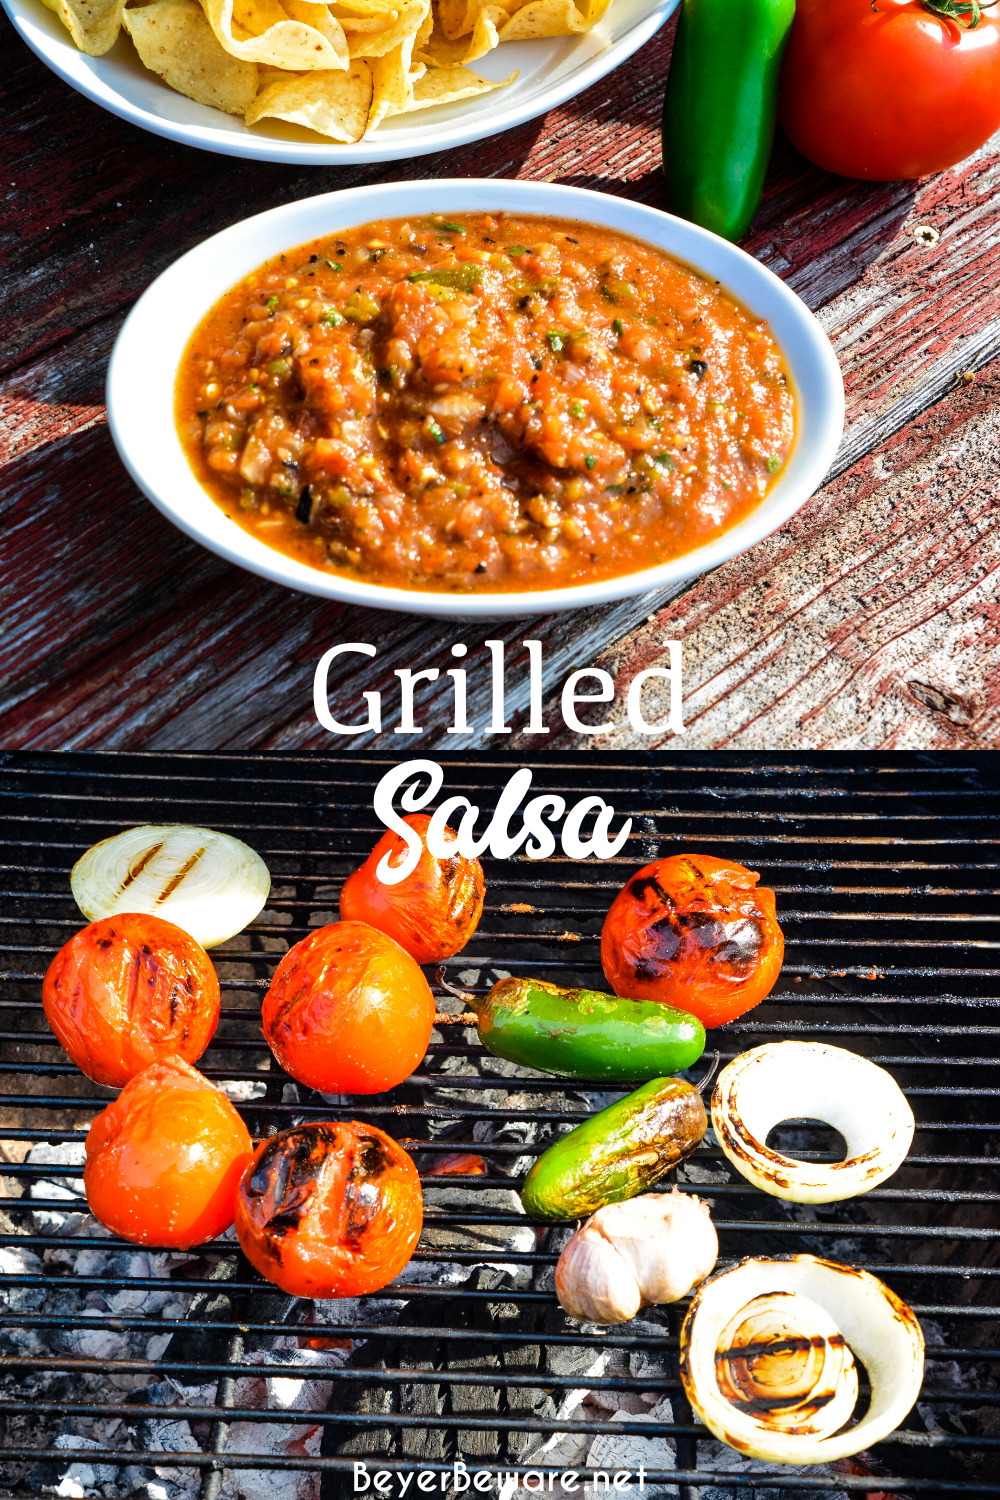 Fire-roasted salsa recipe grills garden fresh tomatoes, jalapenos, onions, garlic, and cilantro for a flame-grilled salsa recipe that is outrageously good.